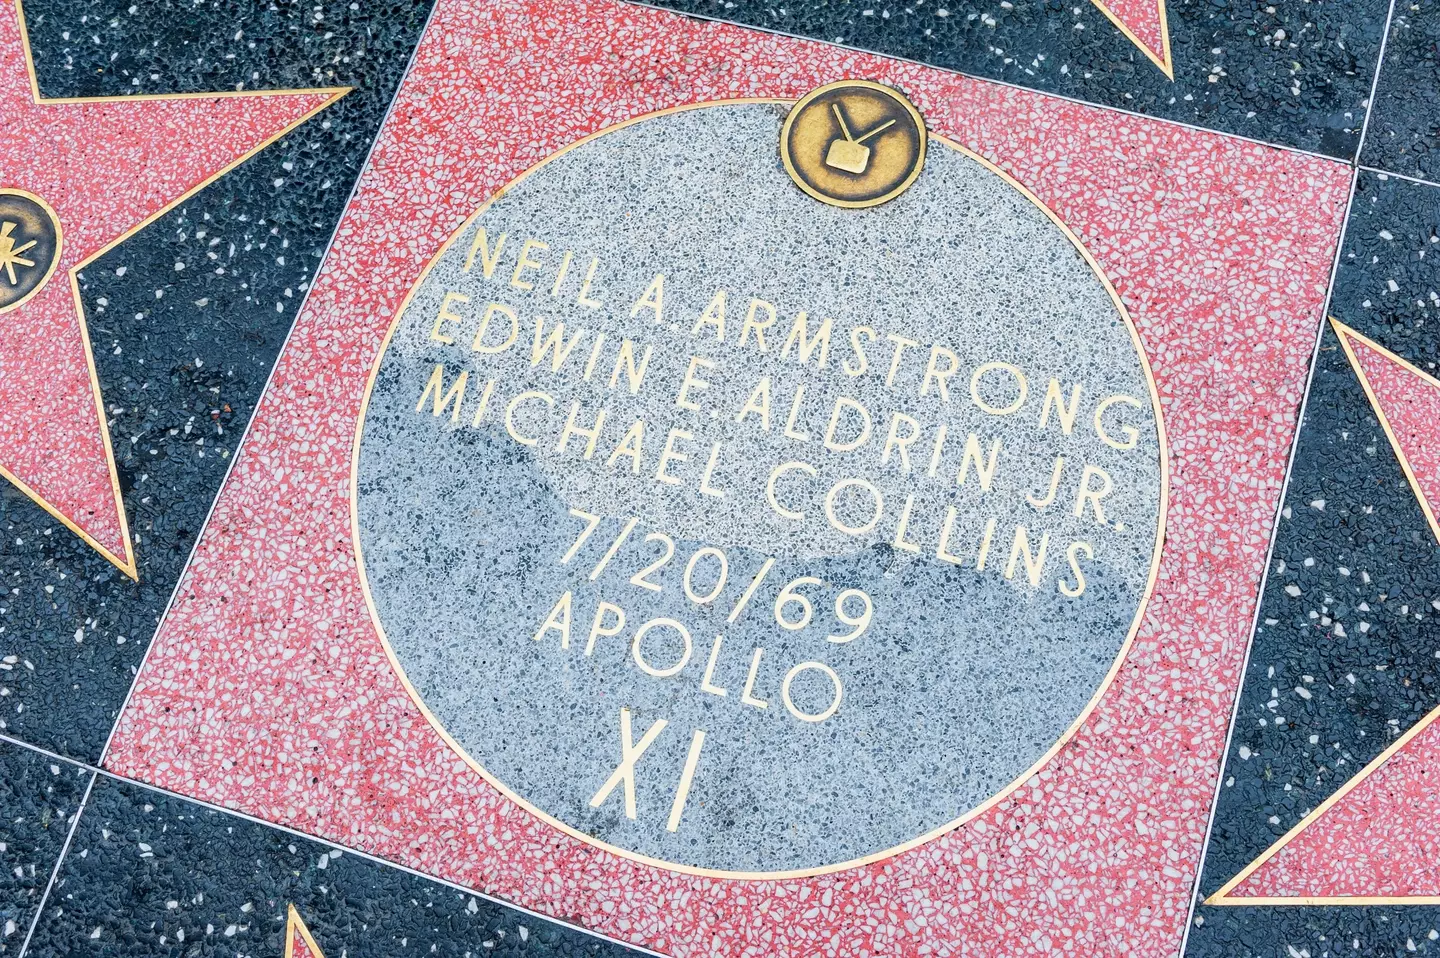 The crew were honoured with a star on the walk of fame.